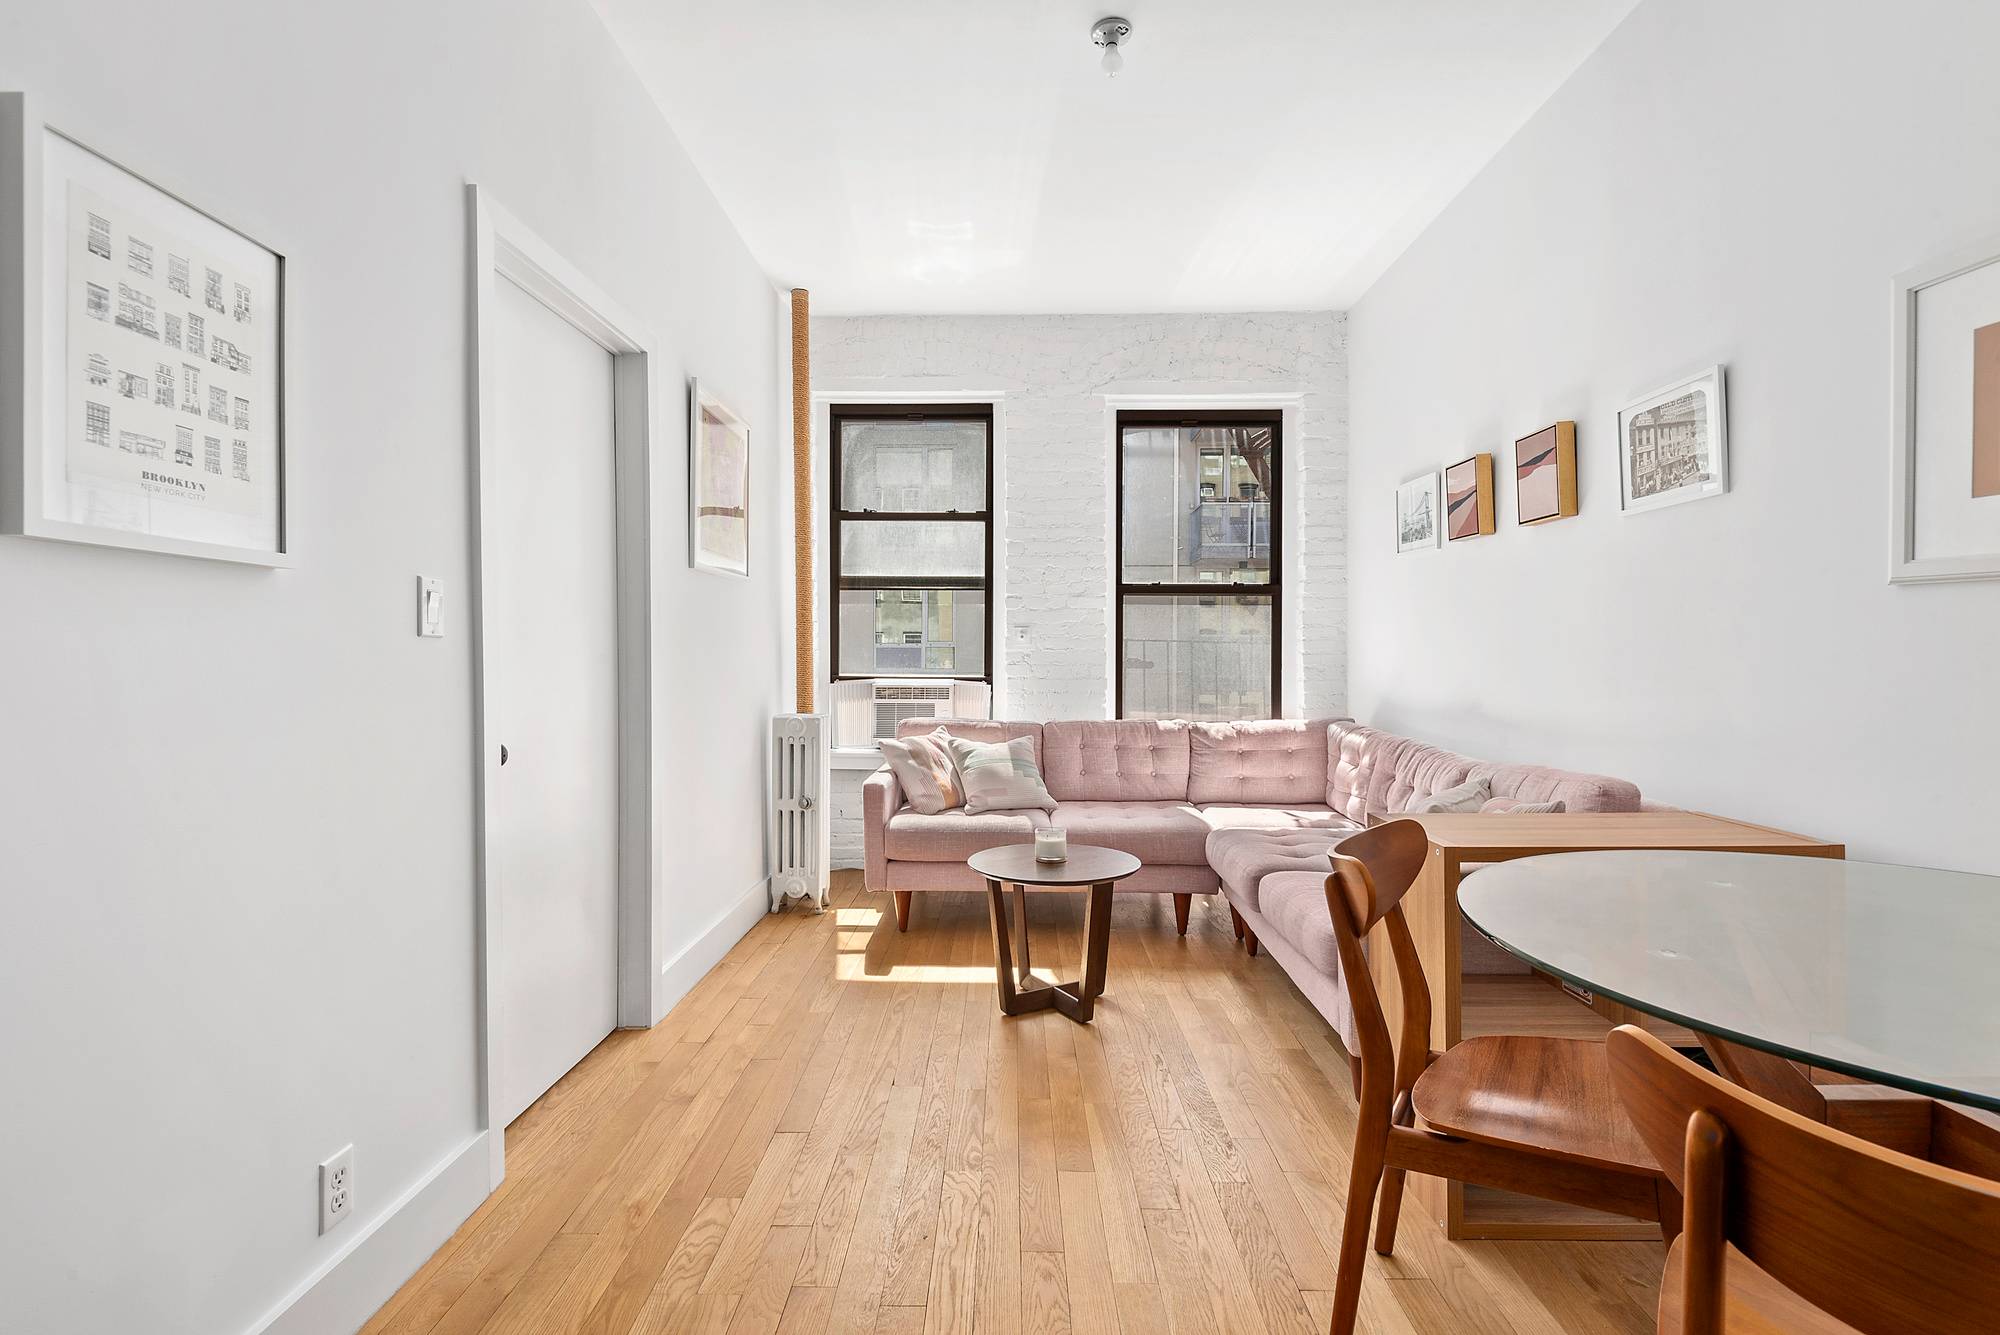 There has not been a charming affordable turn key true two bedroom available for sale on the Northside of Williamsburg for years.